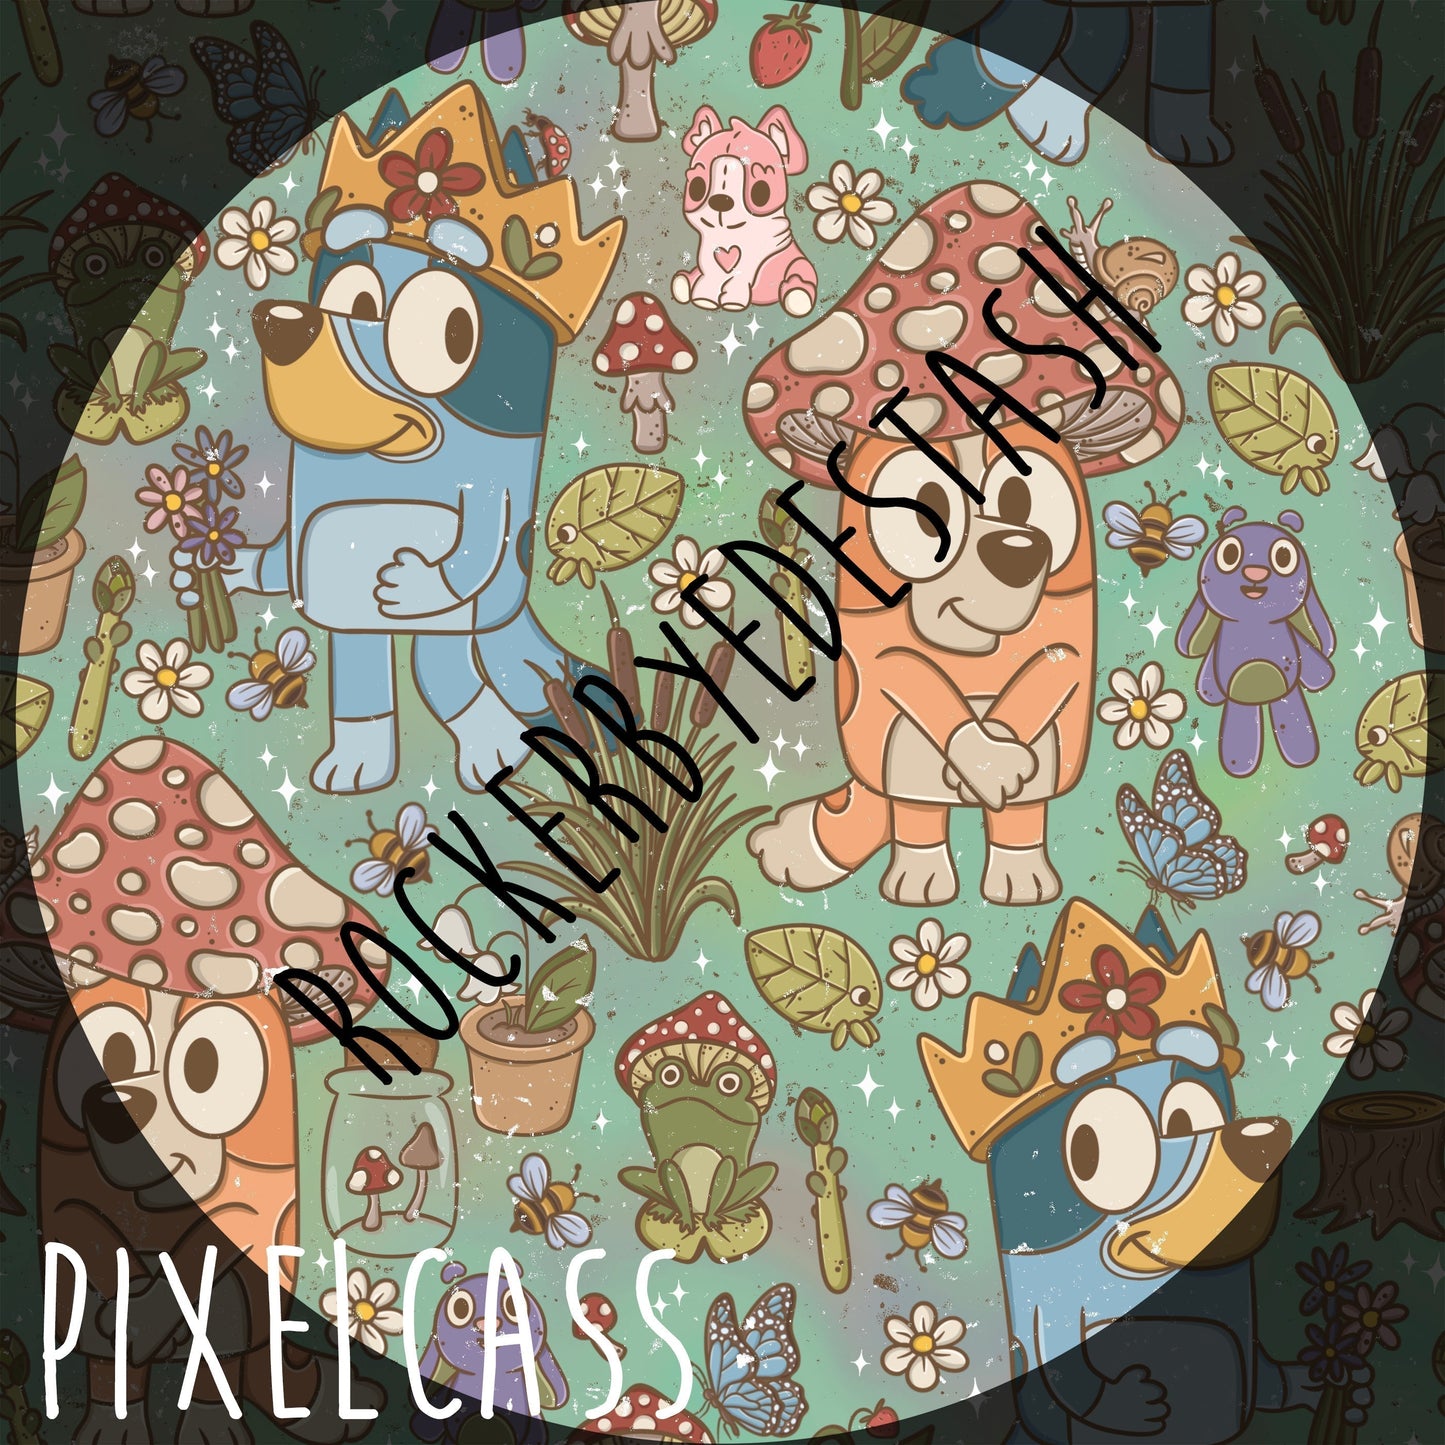 Vinyl - PixelCass Collab PreOrder Round YY - super special flower, pride & cottagecore fabric things inside 1/2 yard rolls